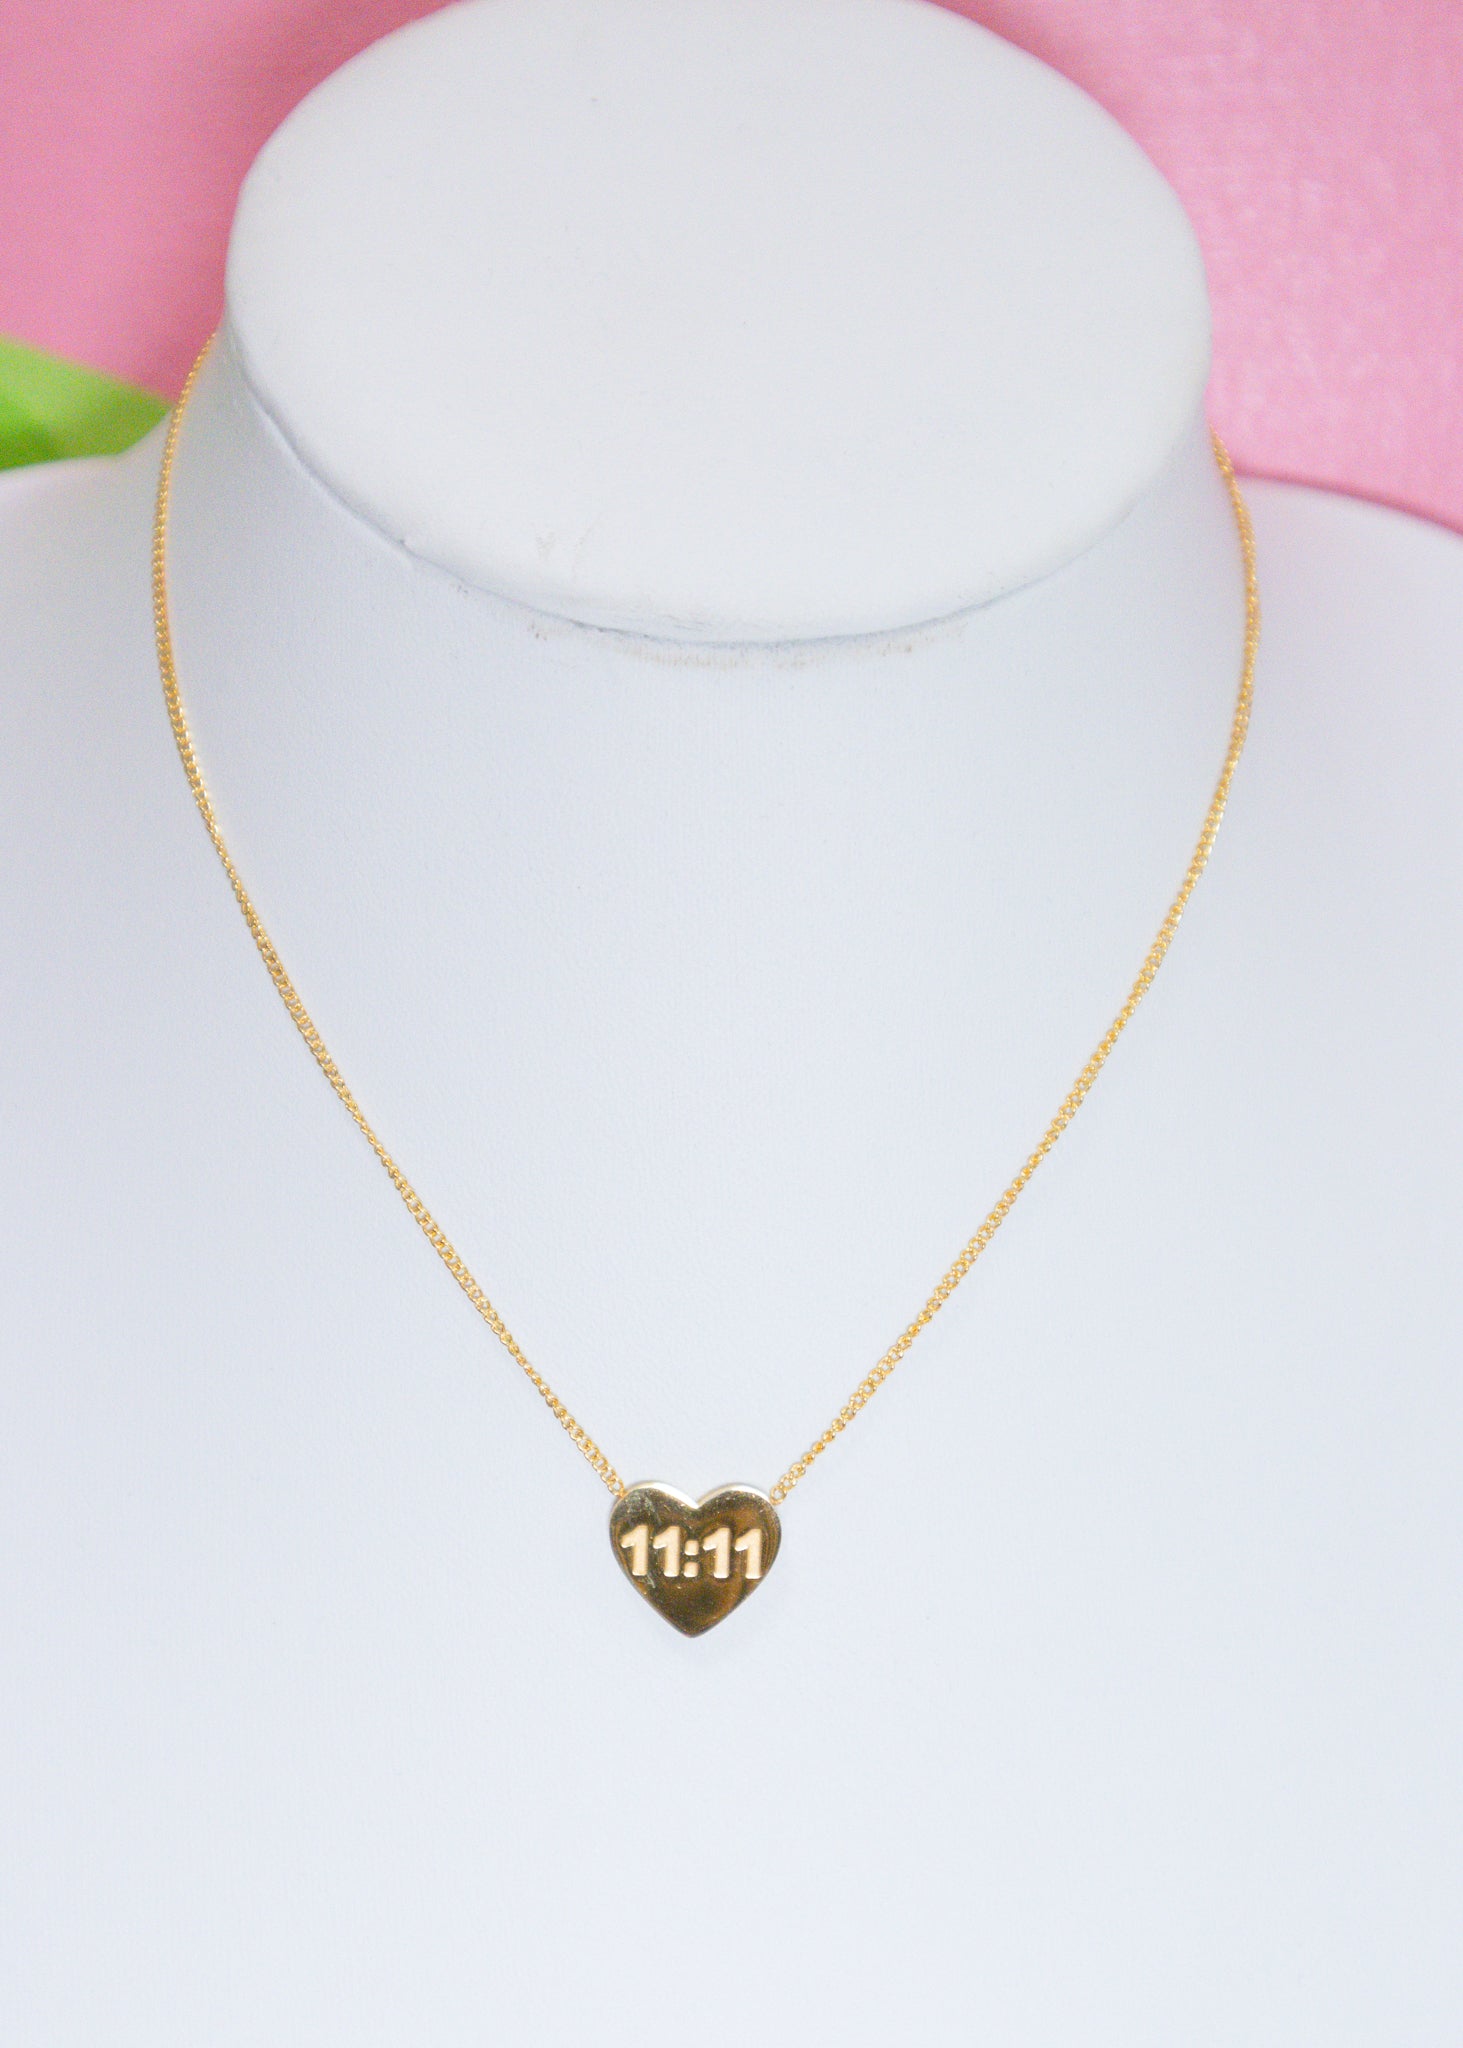 The Gold 11:11 Necklace